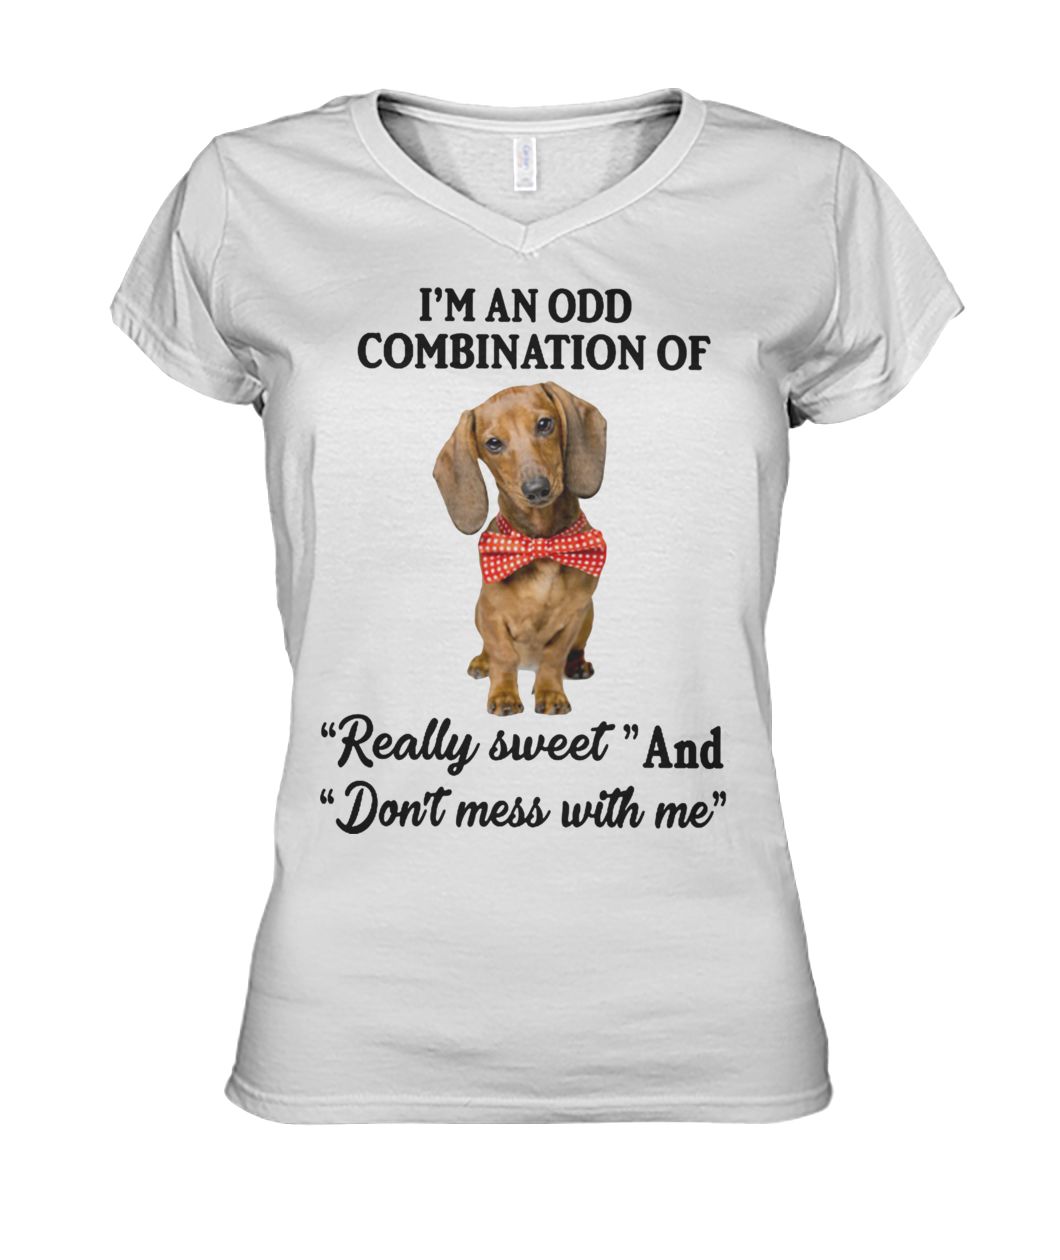 Dachshund I'm an odd combination of really sweet and don't mess with me women's v-neck